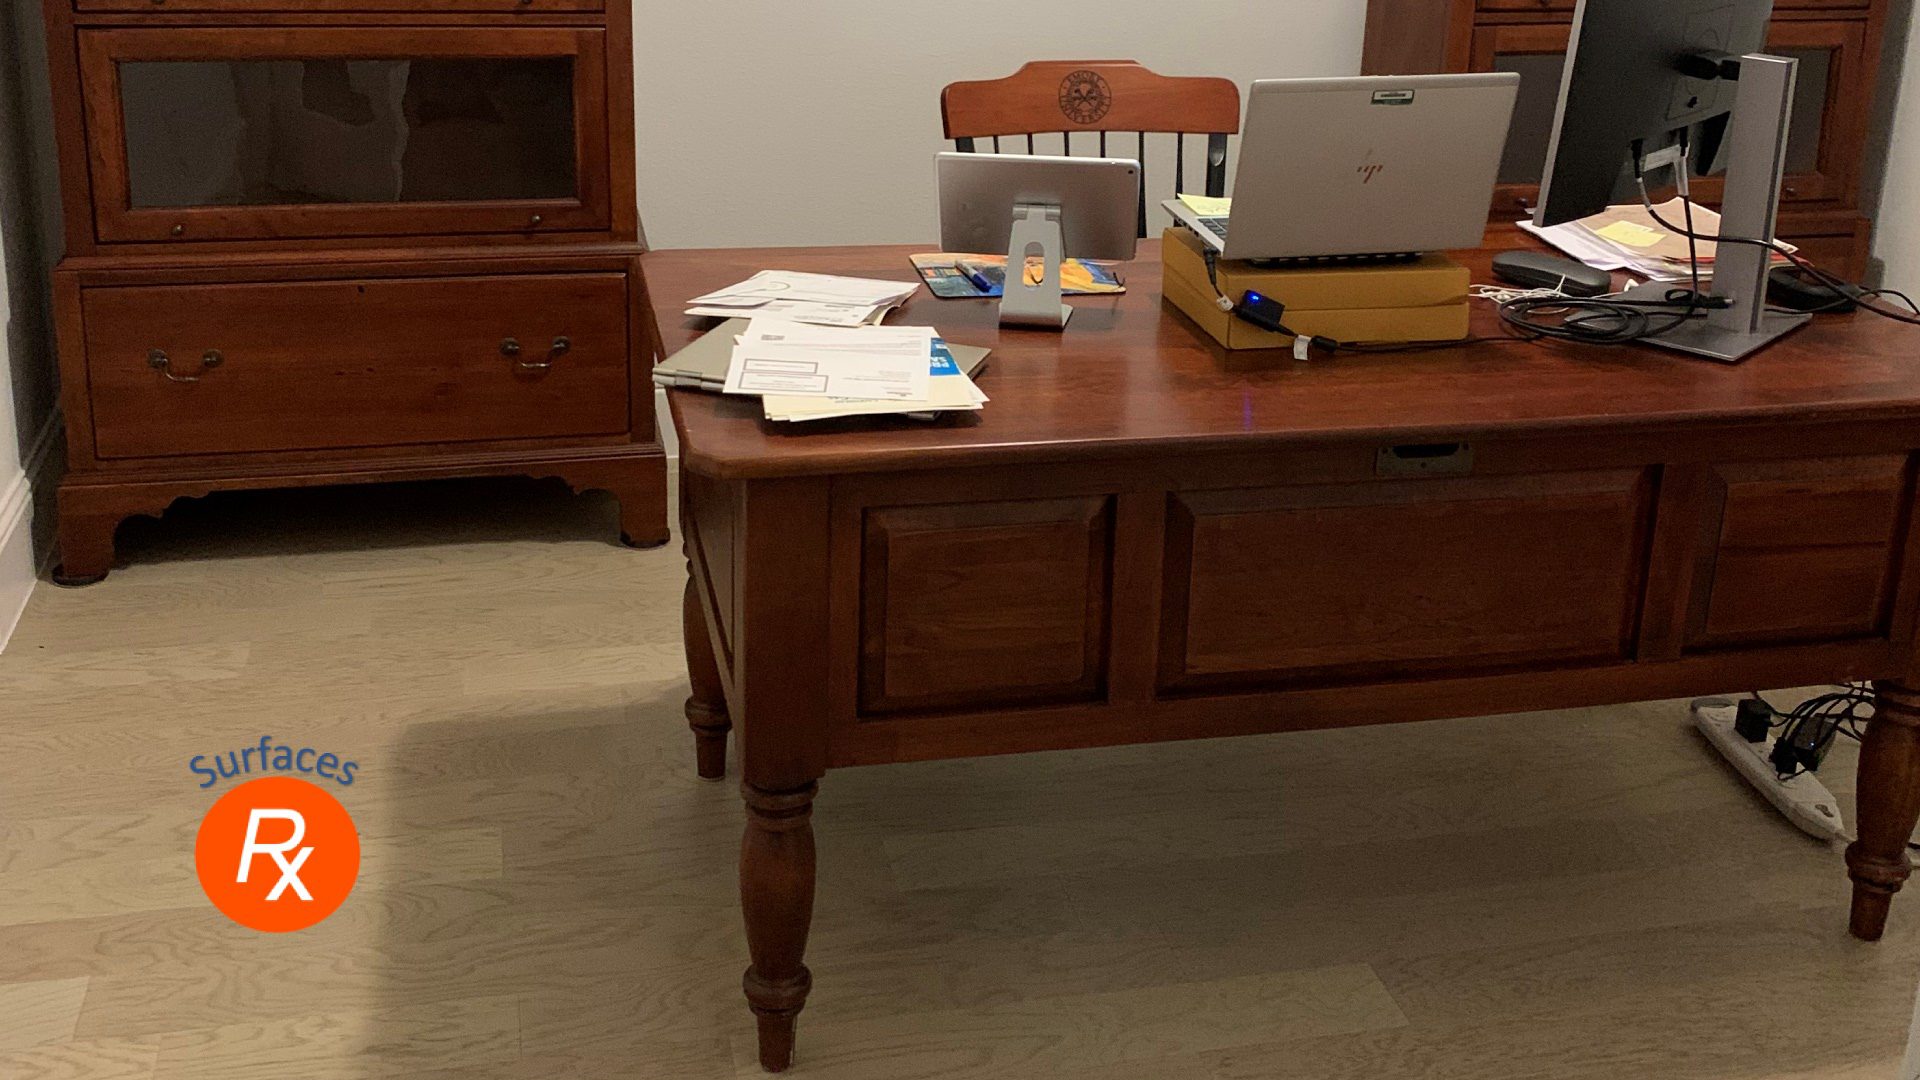 Before Office Furniture Refinishing Dallas Tx by Surface Rx